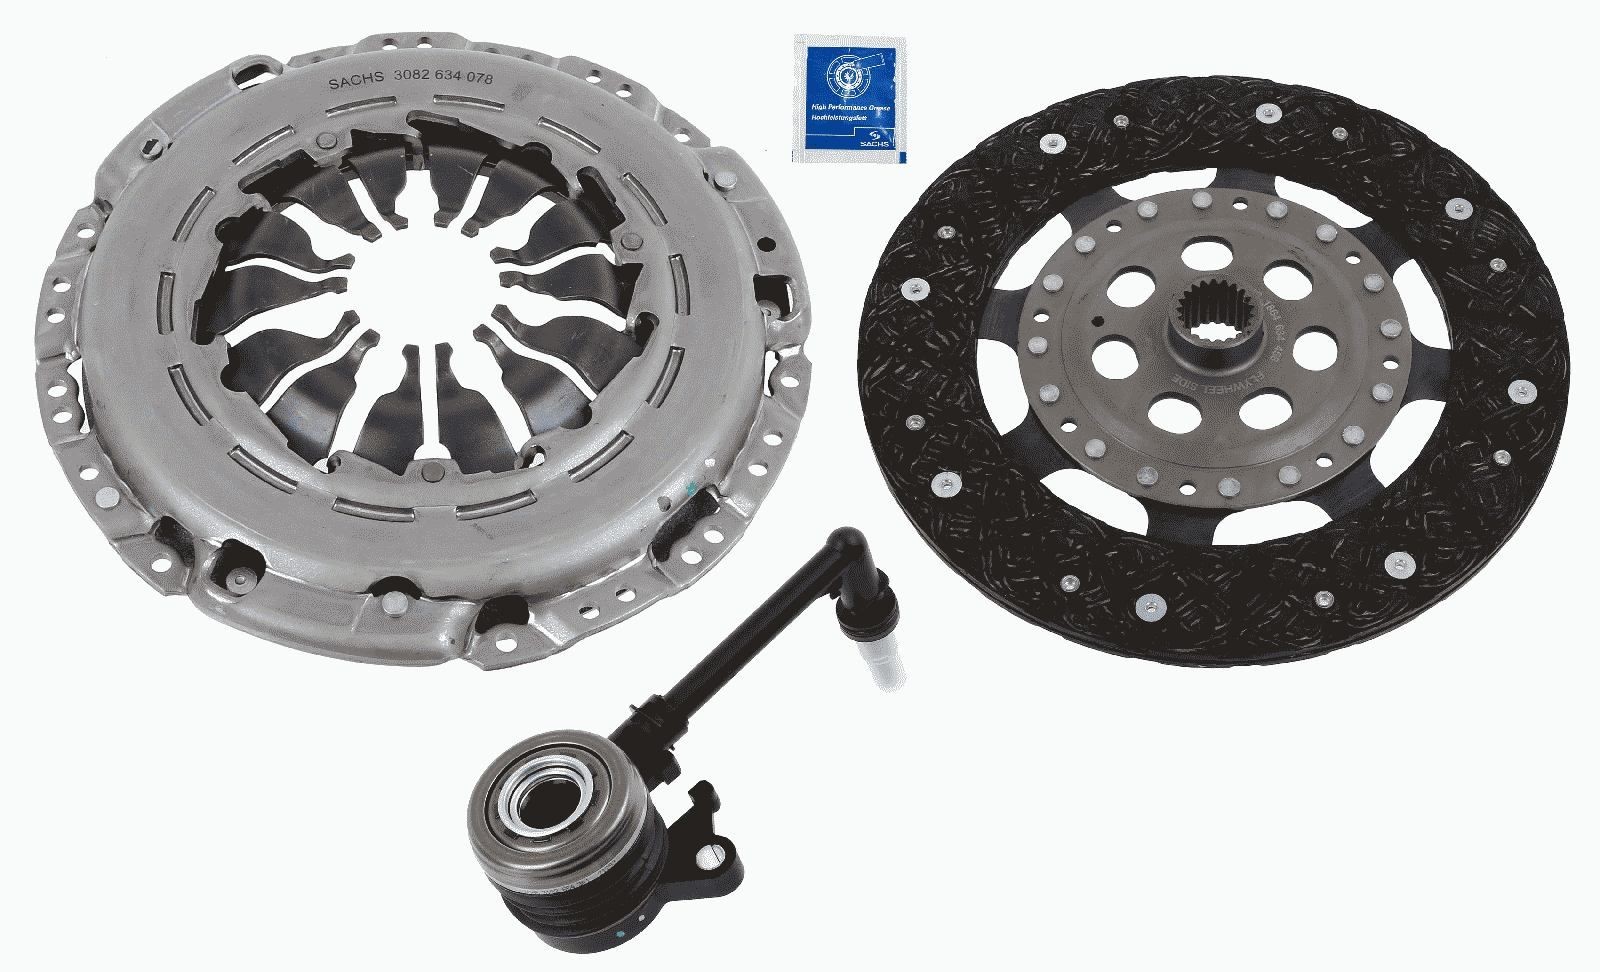 SACHS 3000 990 571 Clutch kit DACIA experience and price